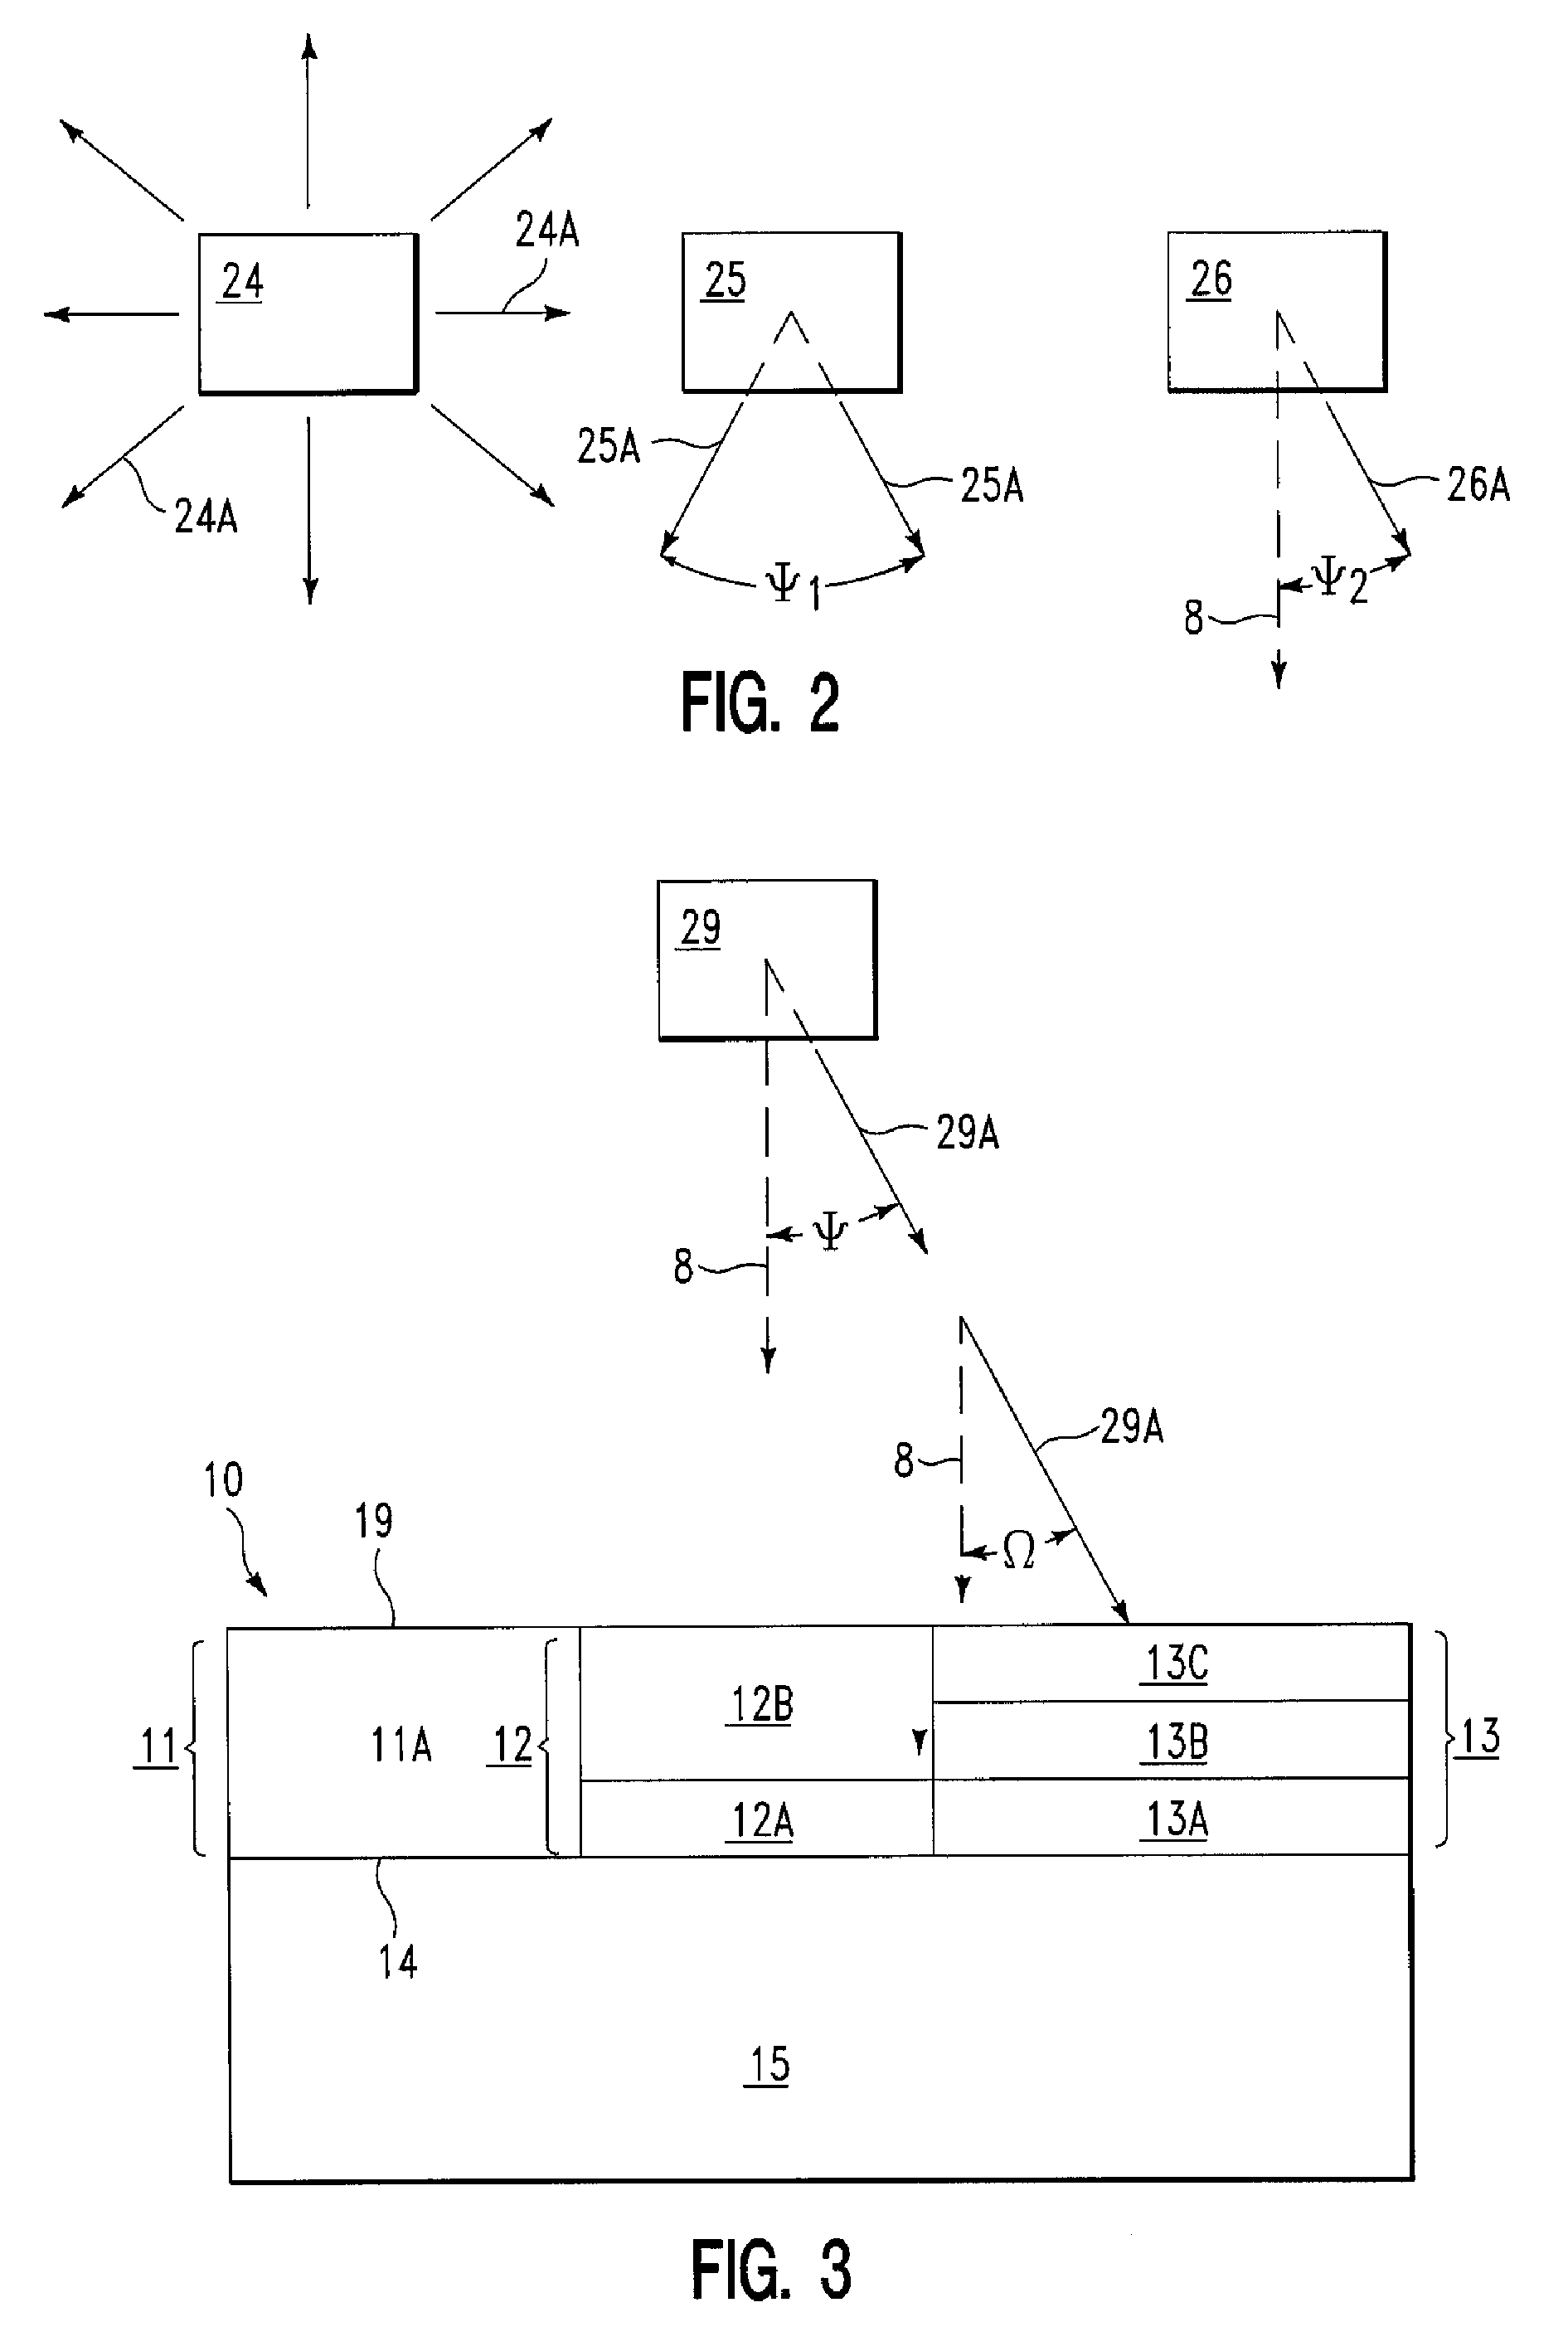 Serial irradiation of a substrate by multiple radiation sources